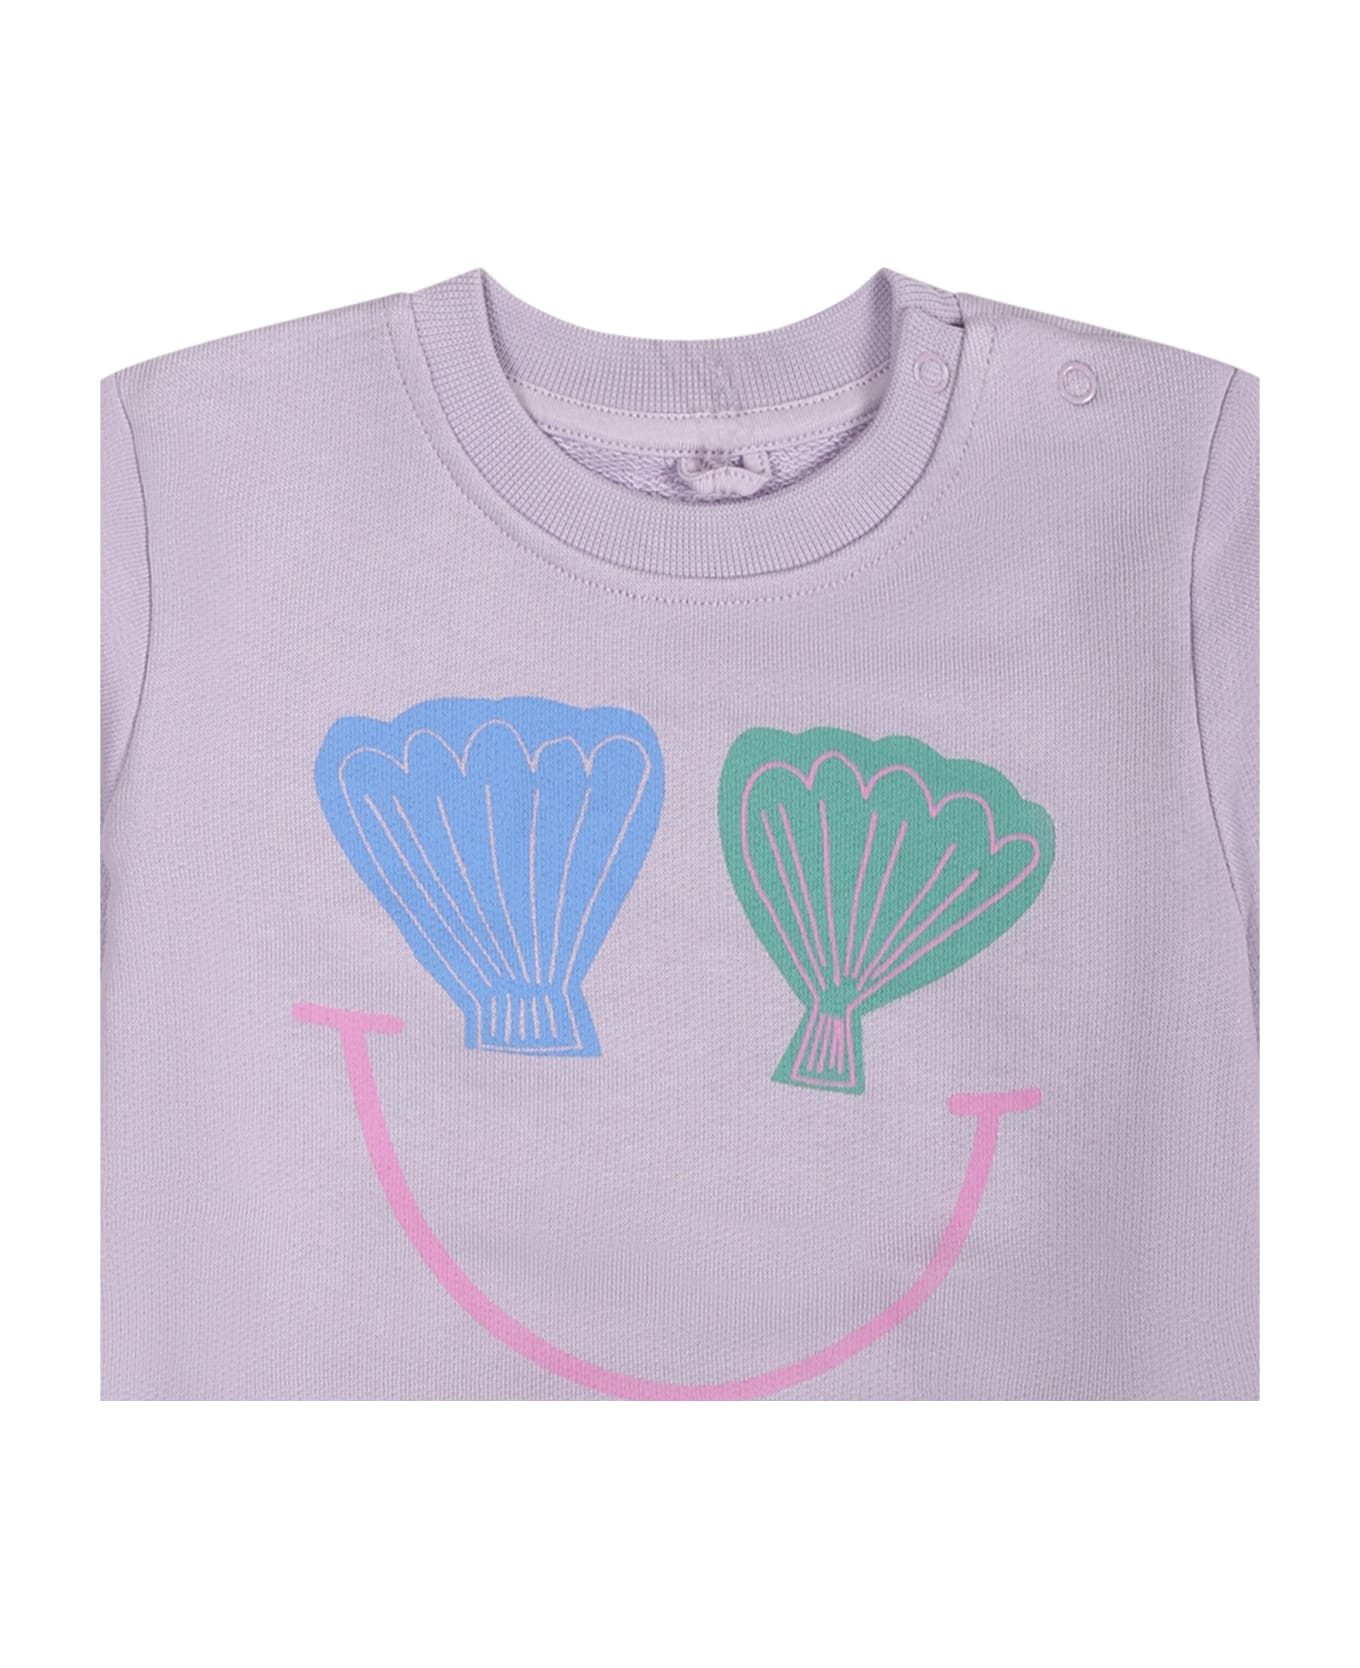 Stella McCartney Kids Purple Sweatshirt For Baby Girl With Smiley And Shells - Violet